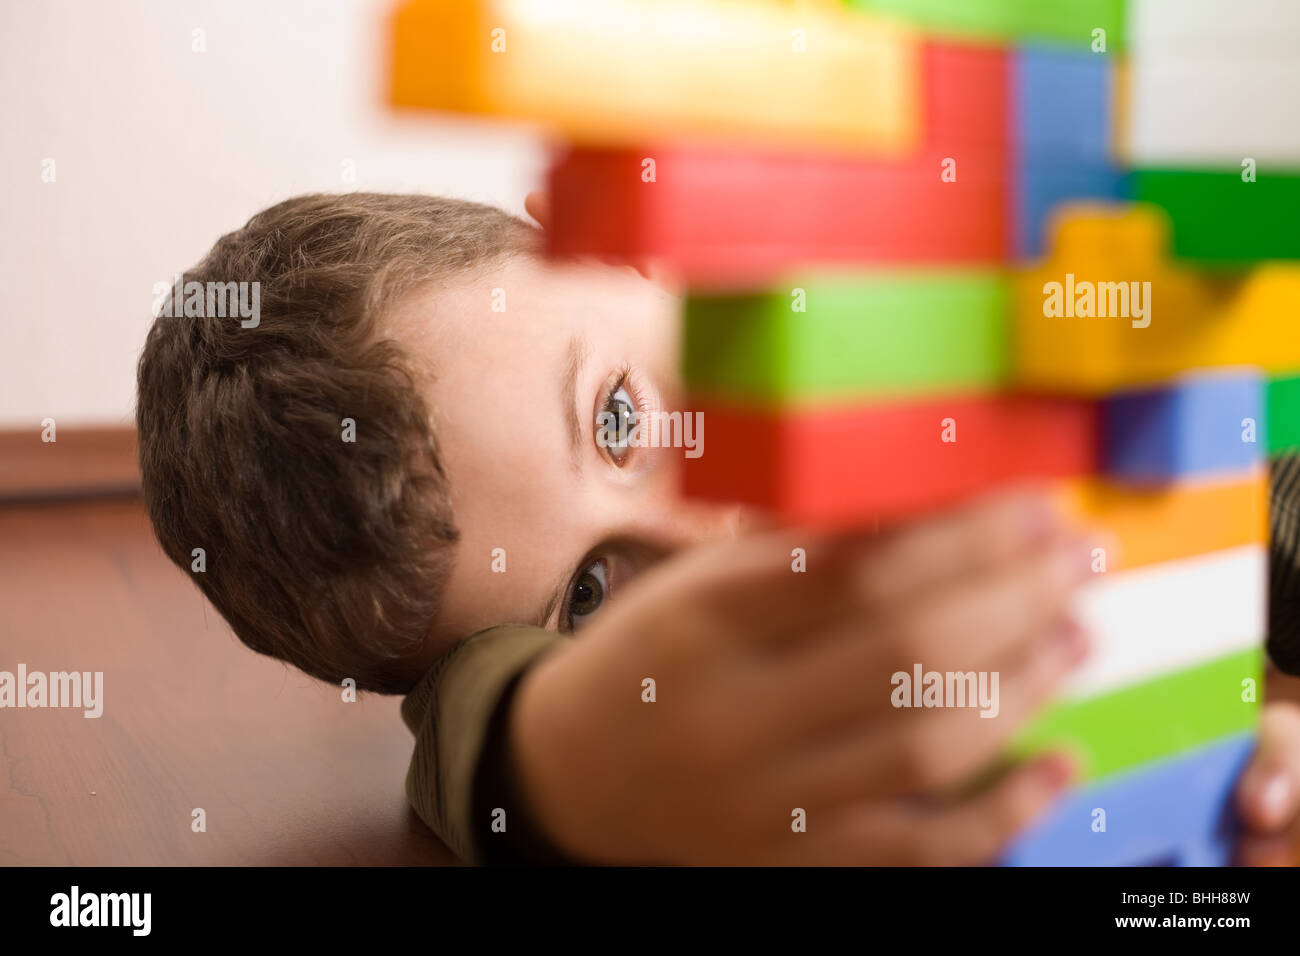 8 year old boy playing with colorful cubes on the floor Stock Photo